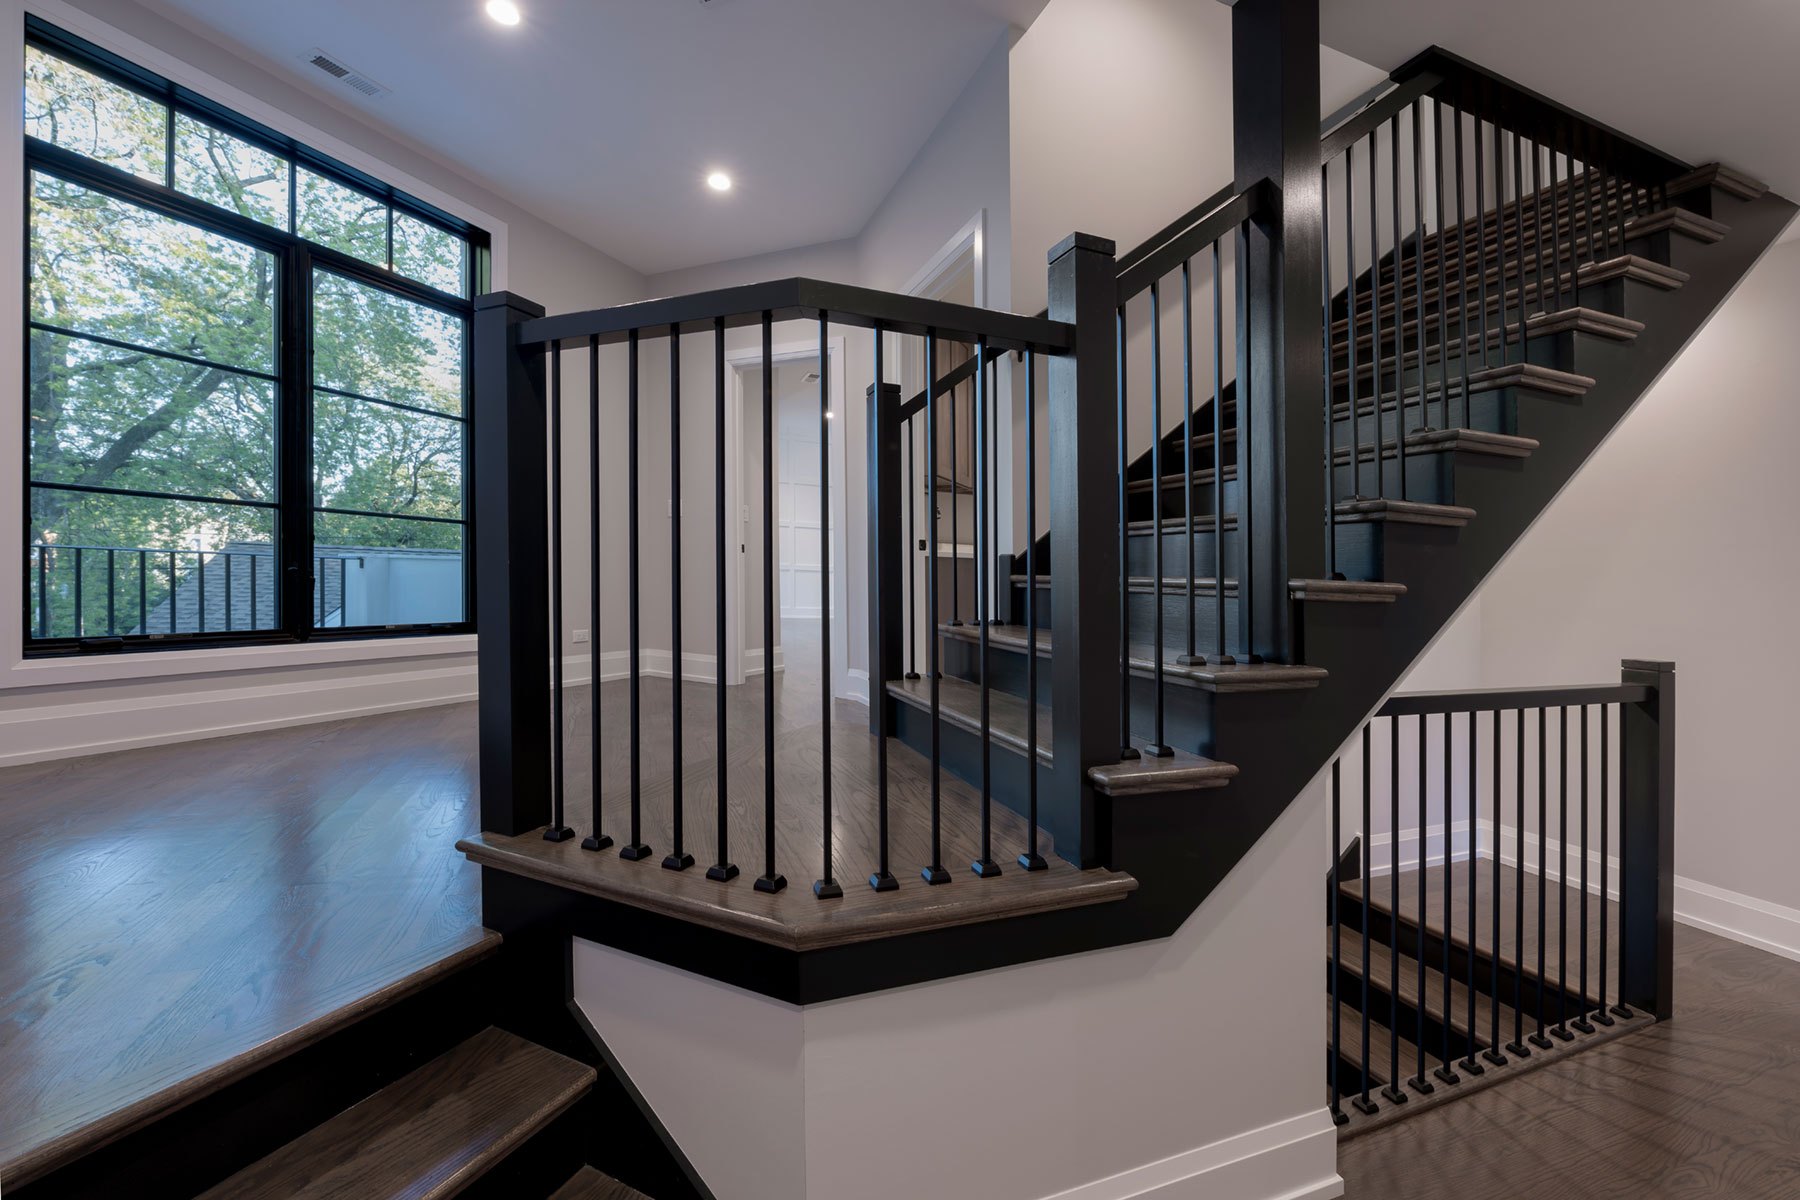 Stairs - N. Francisco Ave., Chicago, IL Custom Home. America's Custom Home Builders: New Construction, Remodeling, Restoration Services. Residential and Commercial.